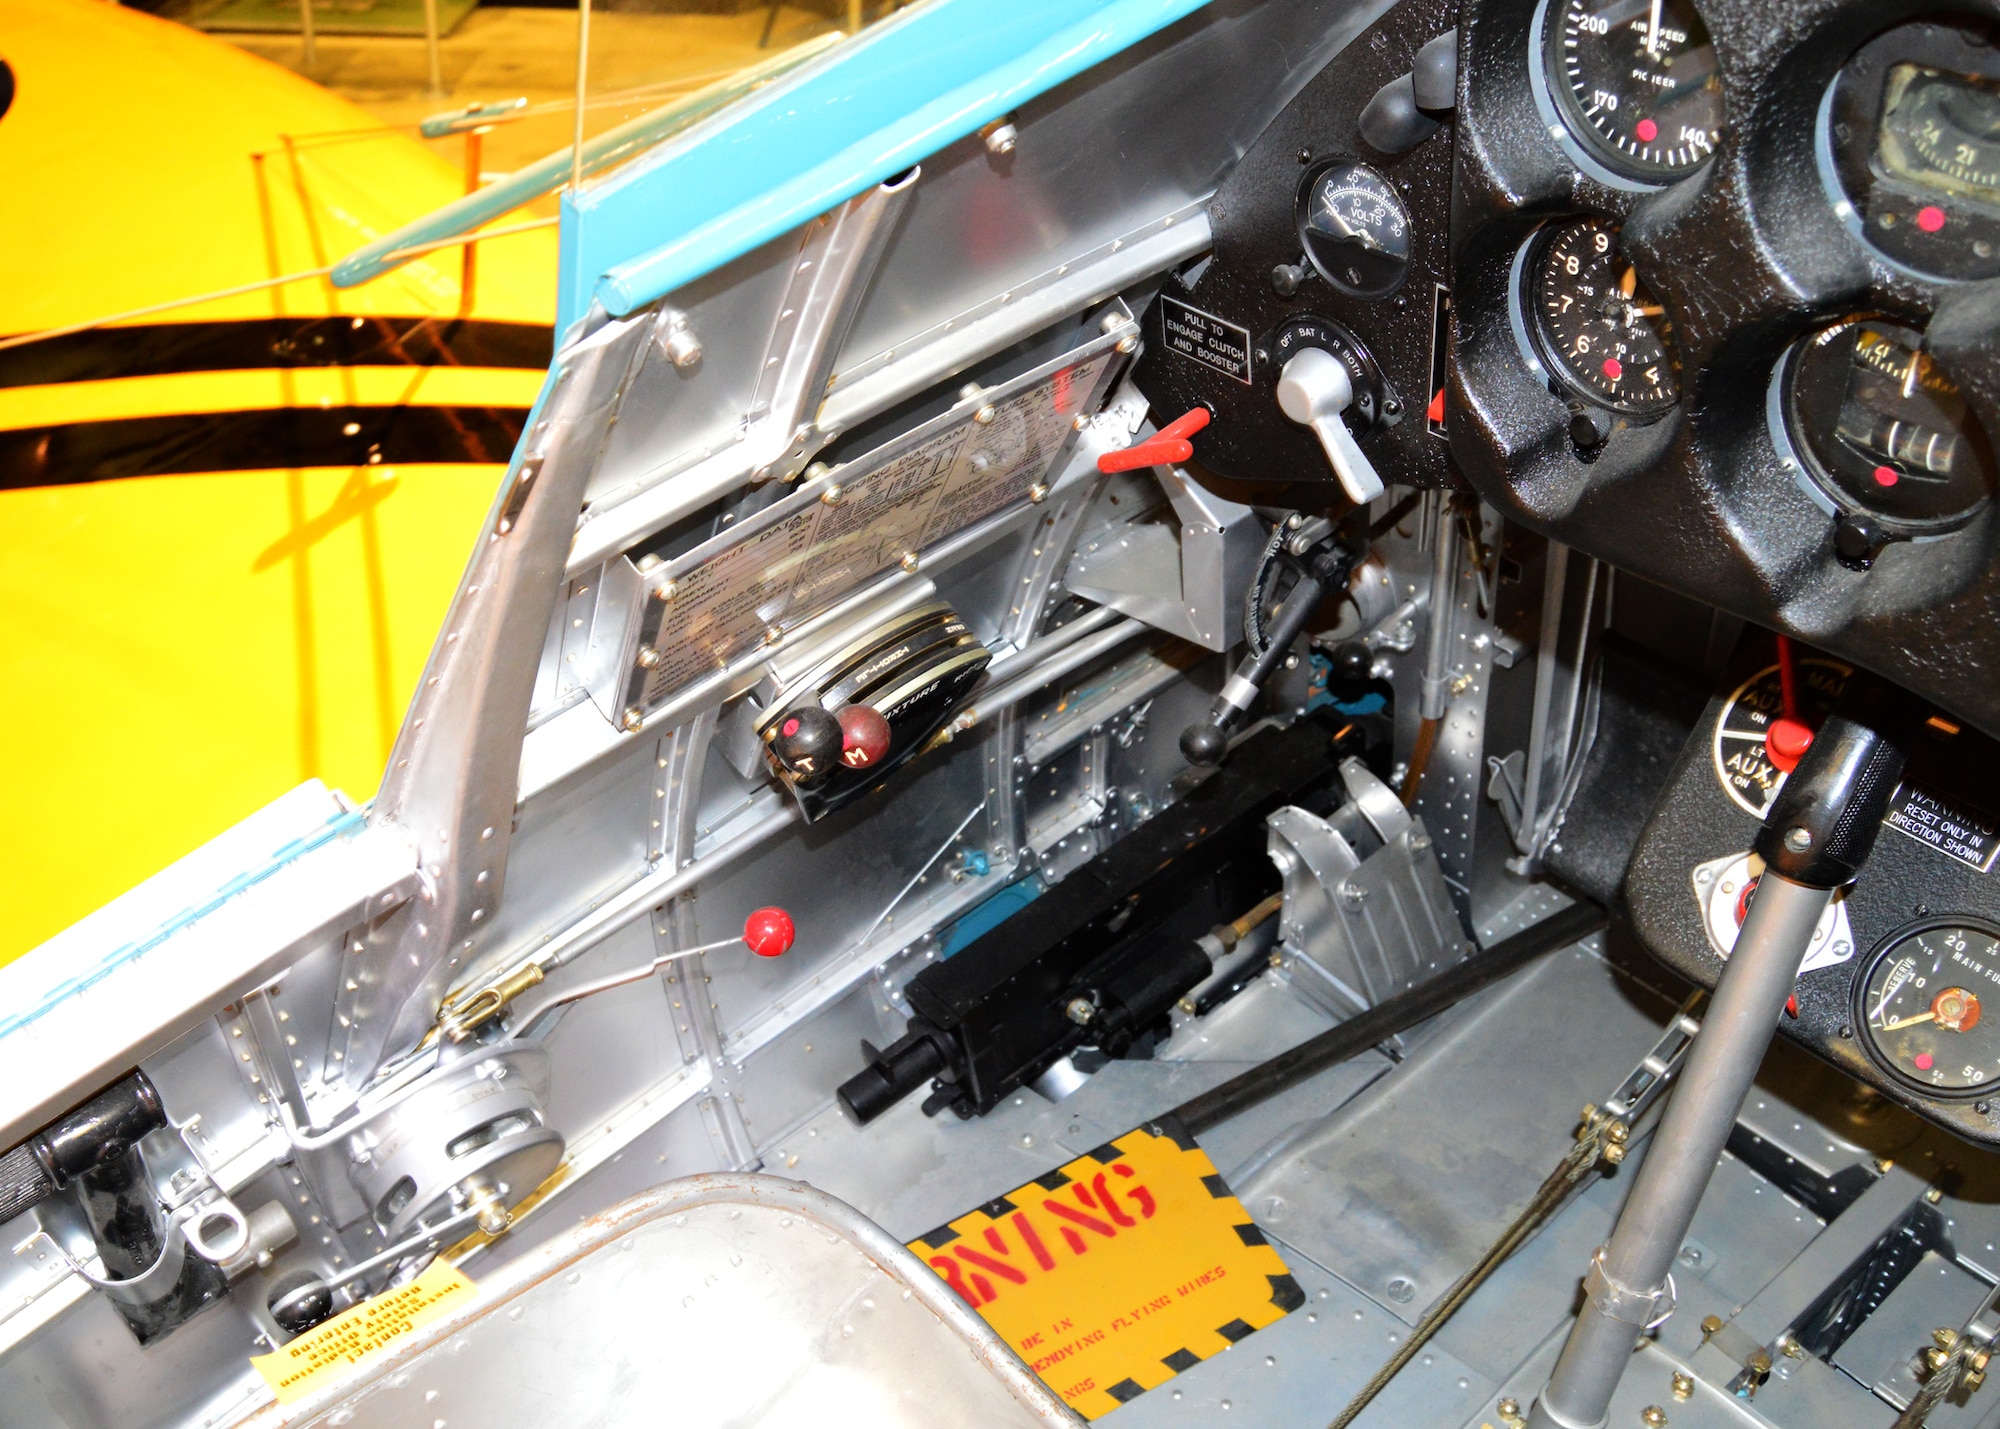 DAYTON, Ohio -- Boeing P-26A cockpit in the Early Years Gallery at the National Museum of the United States Air Force. (U.S. Air Force photo by Ken LaRock)